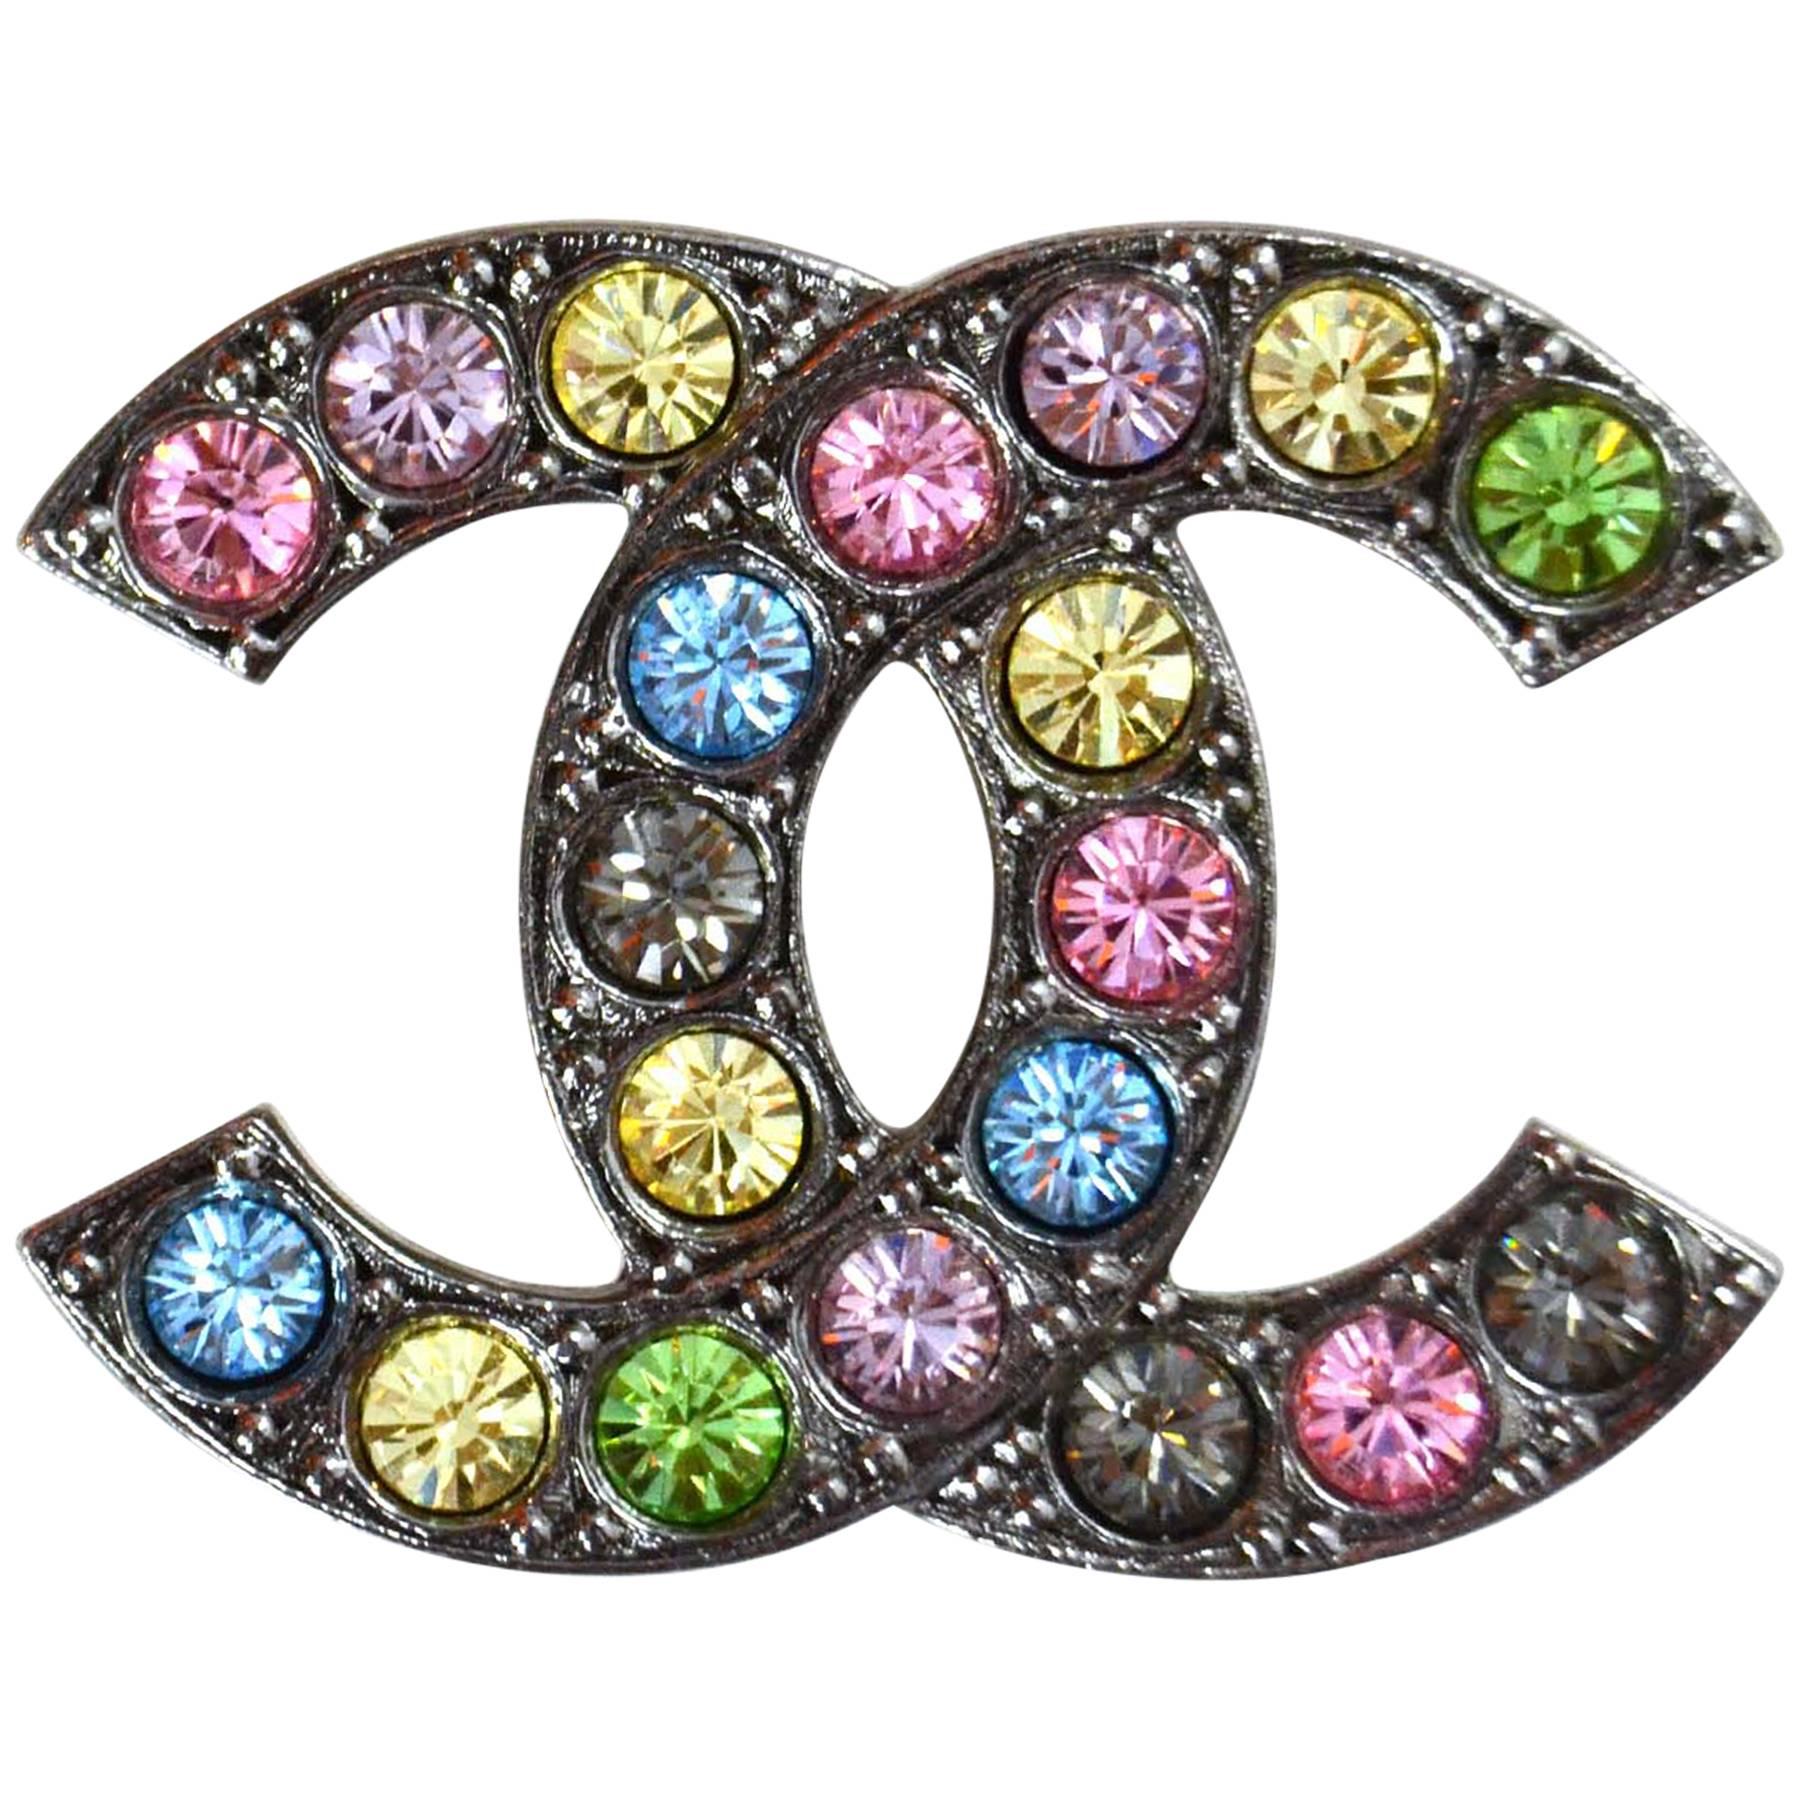 Chanel Multicolored Tutti Fruitti Crystal CC Brooch with Box and Dust bag